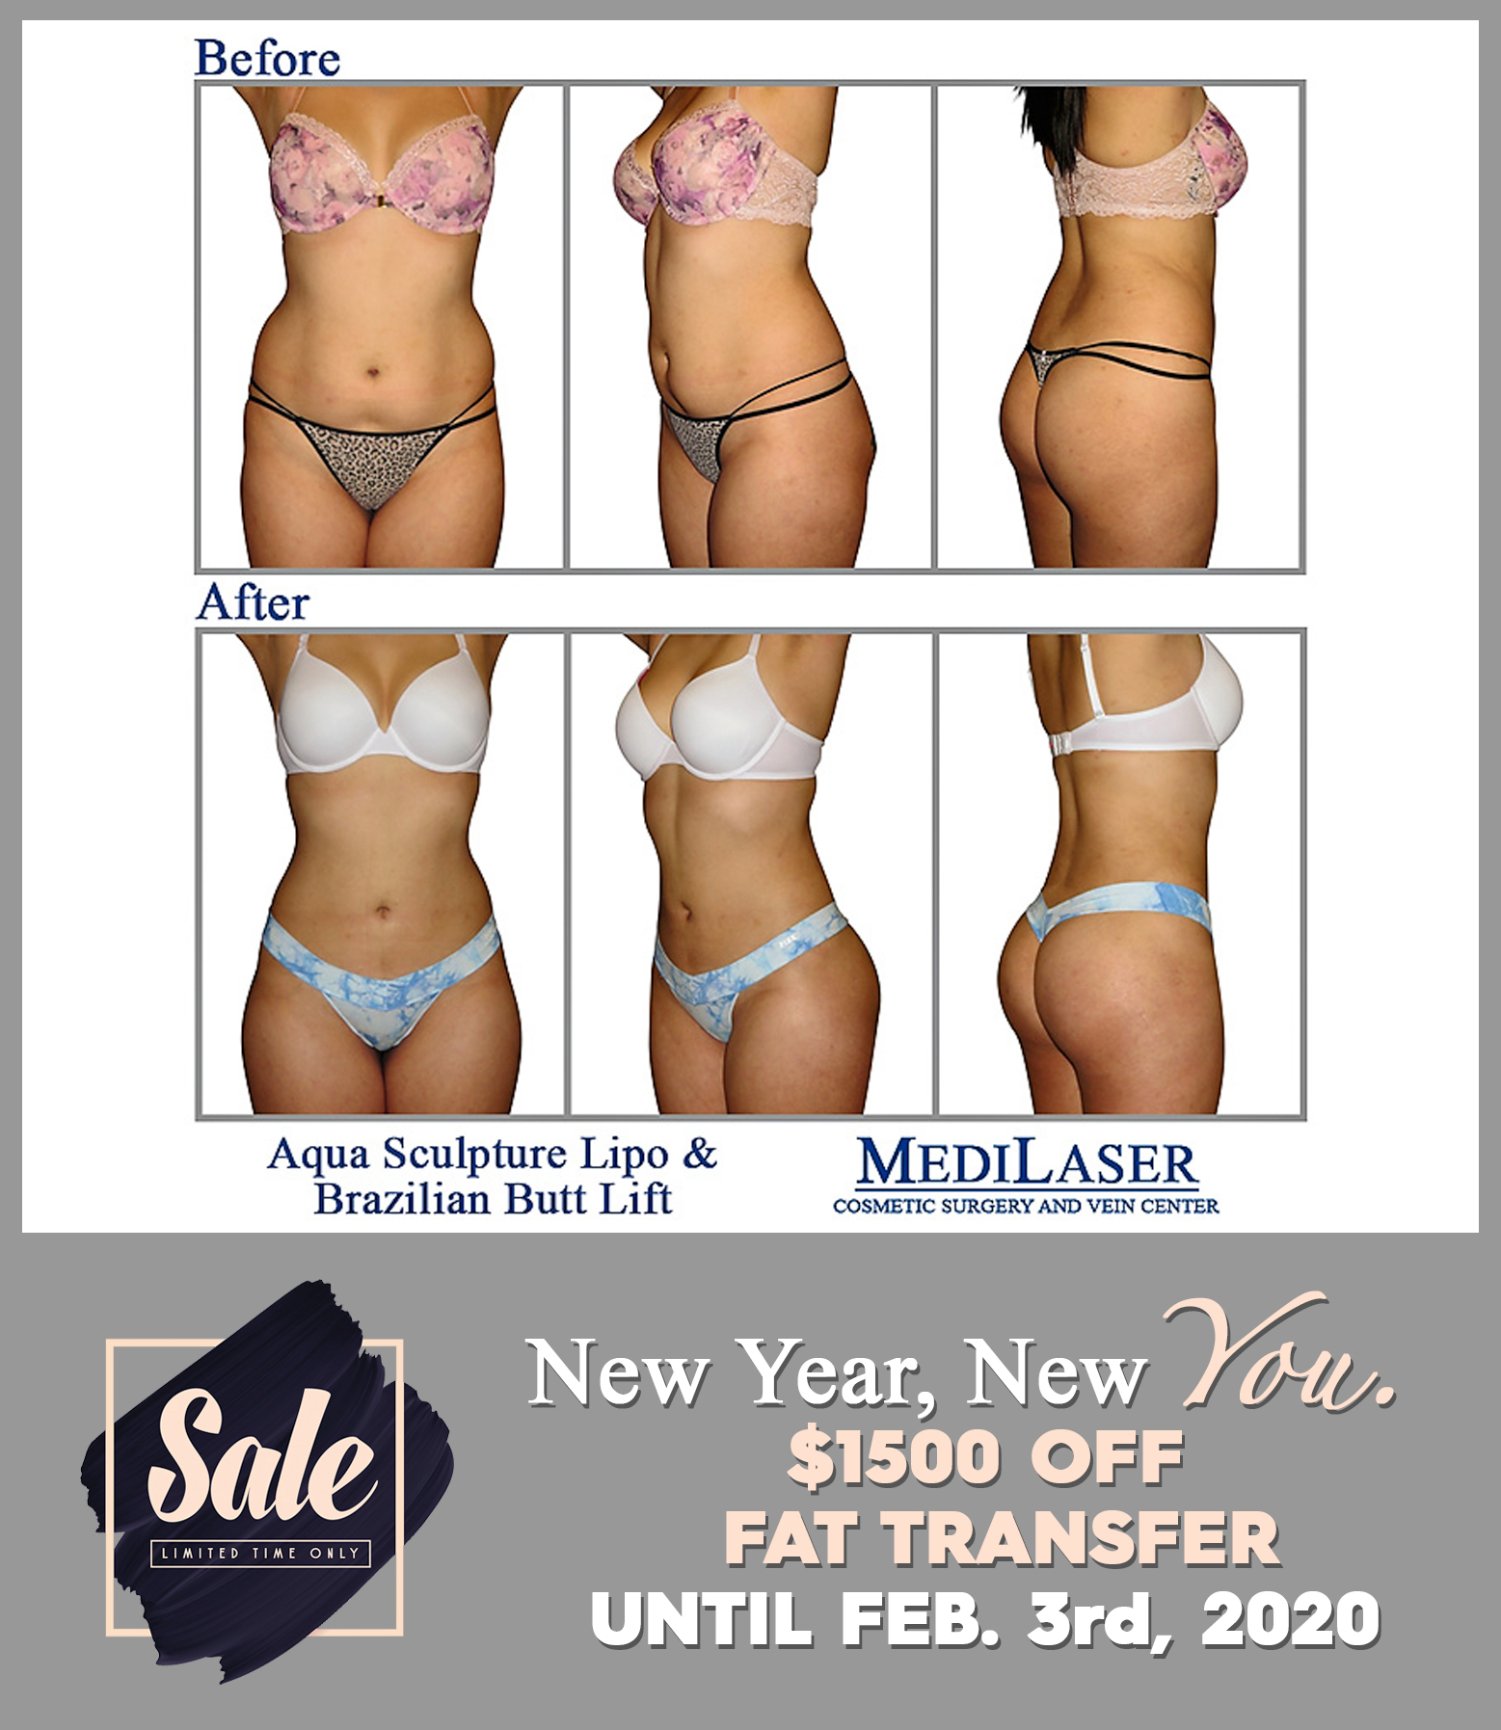 Fat Transfer Amazing Before and After! - Medilaser Surgery and Vein Center